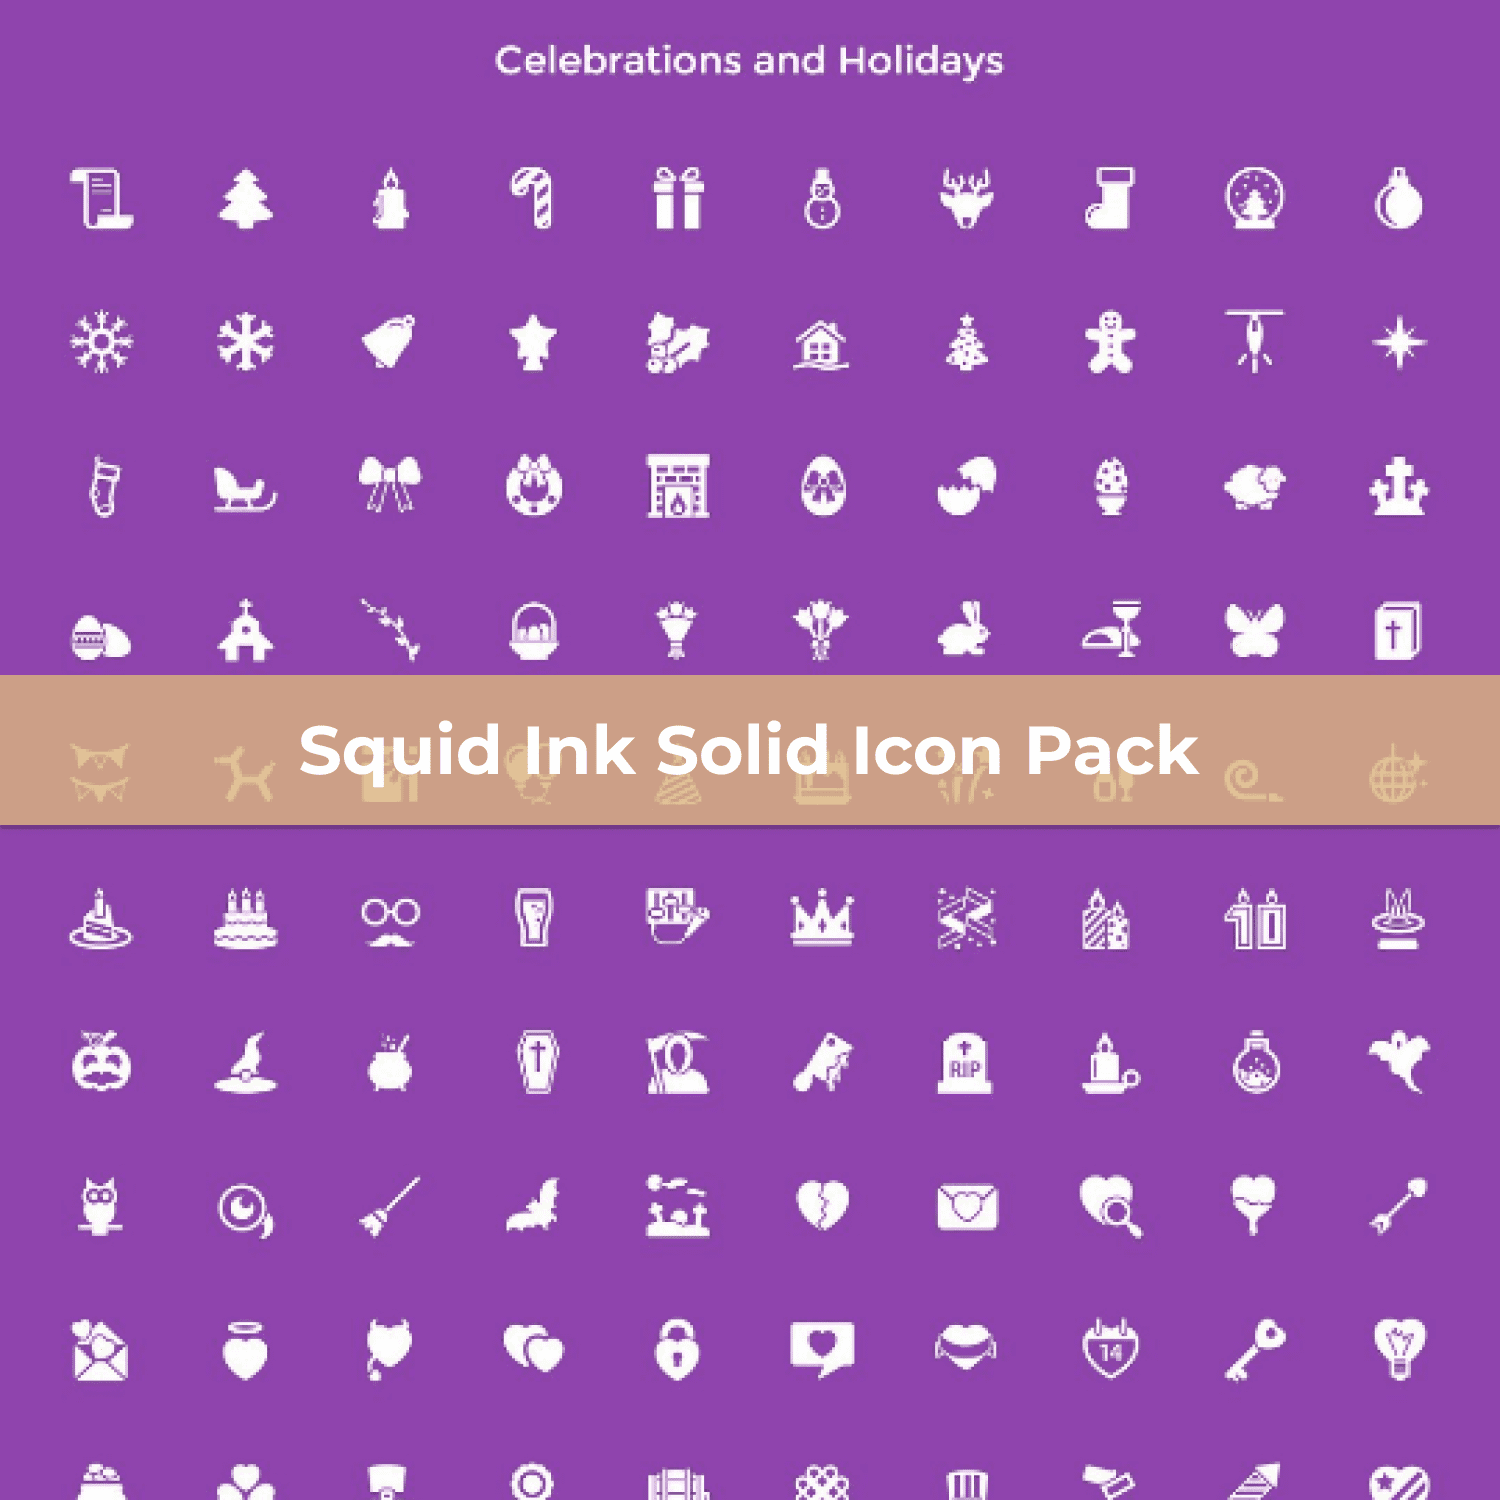 Squid Ink Solid Icon Pack cover image.